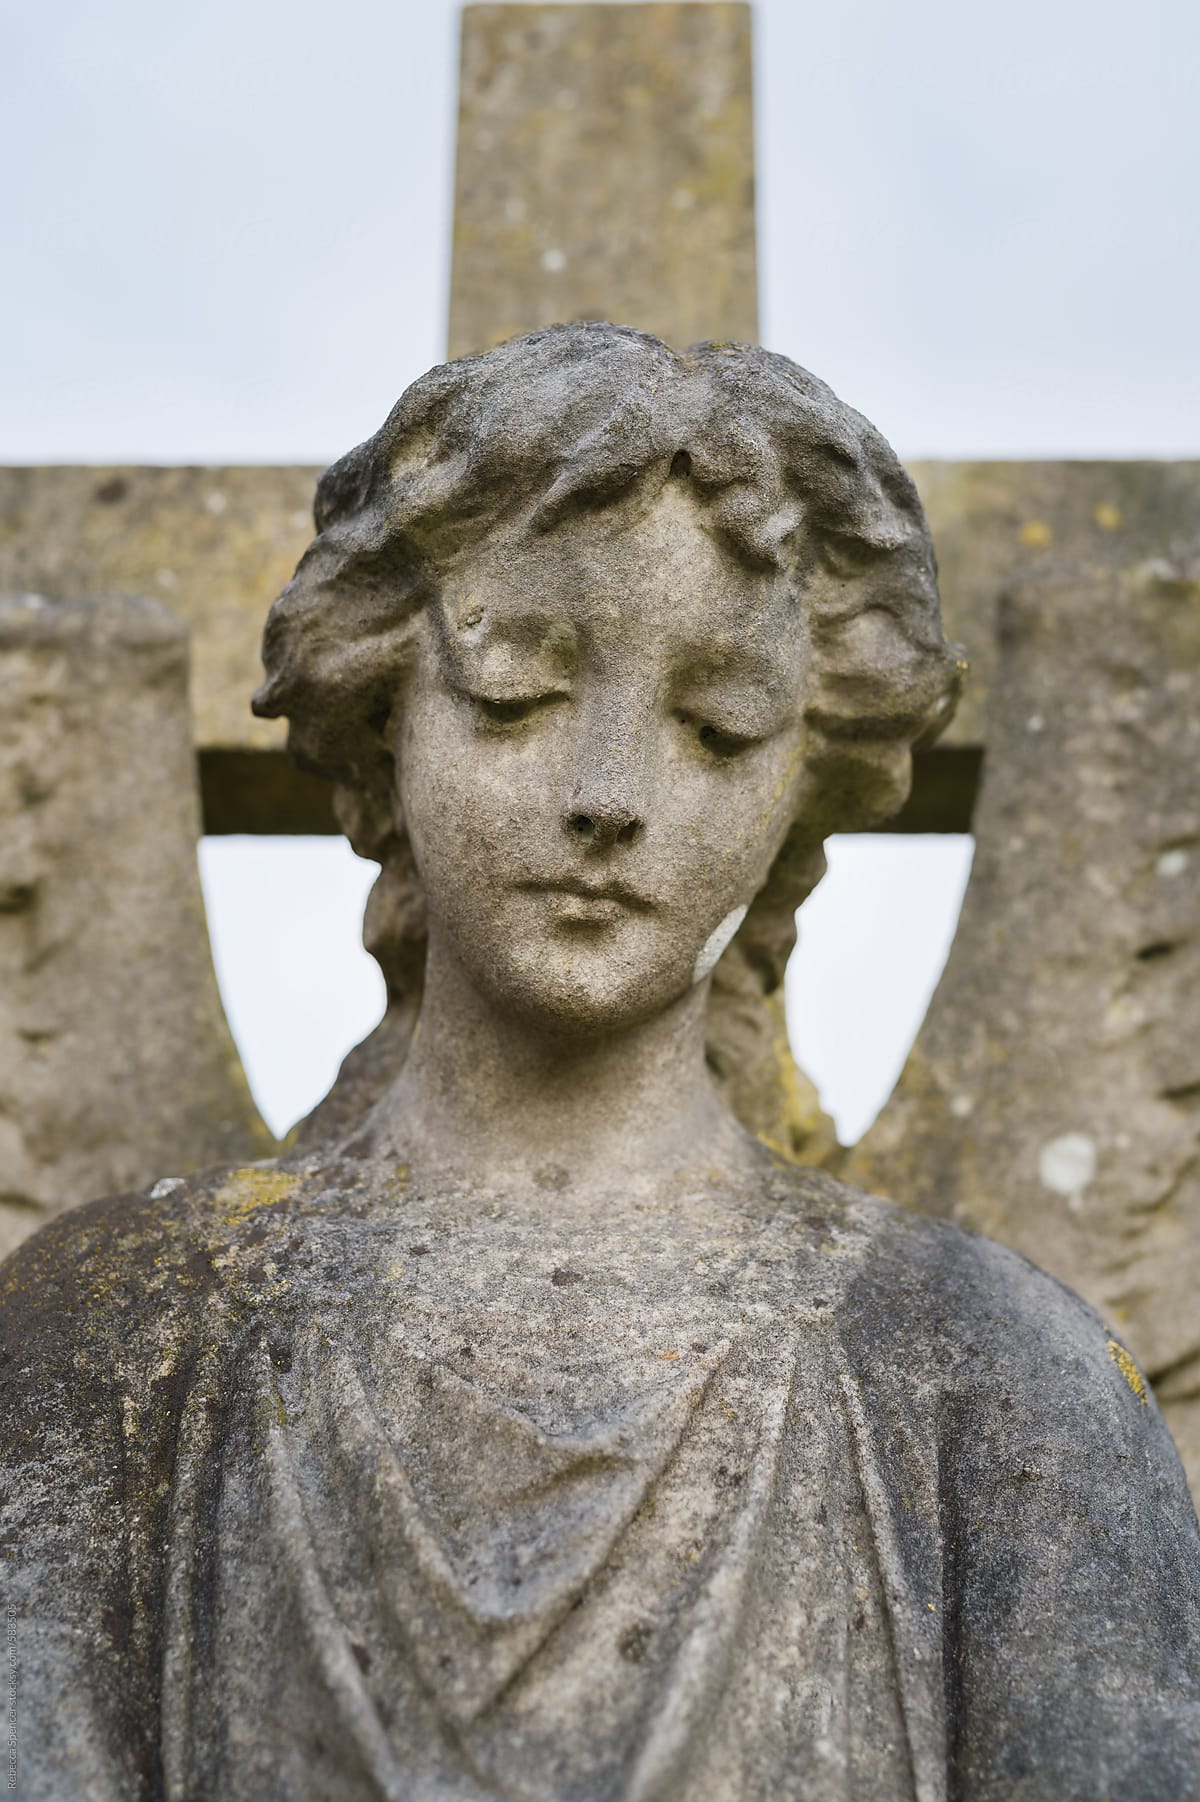 old weeping angel statue